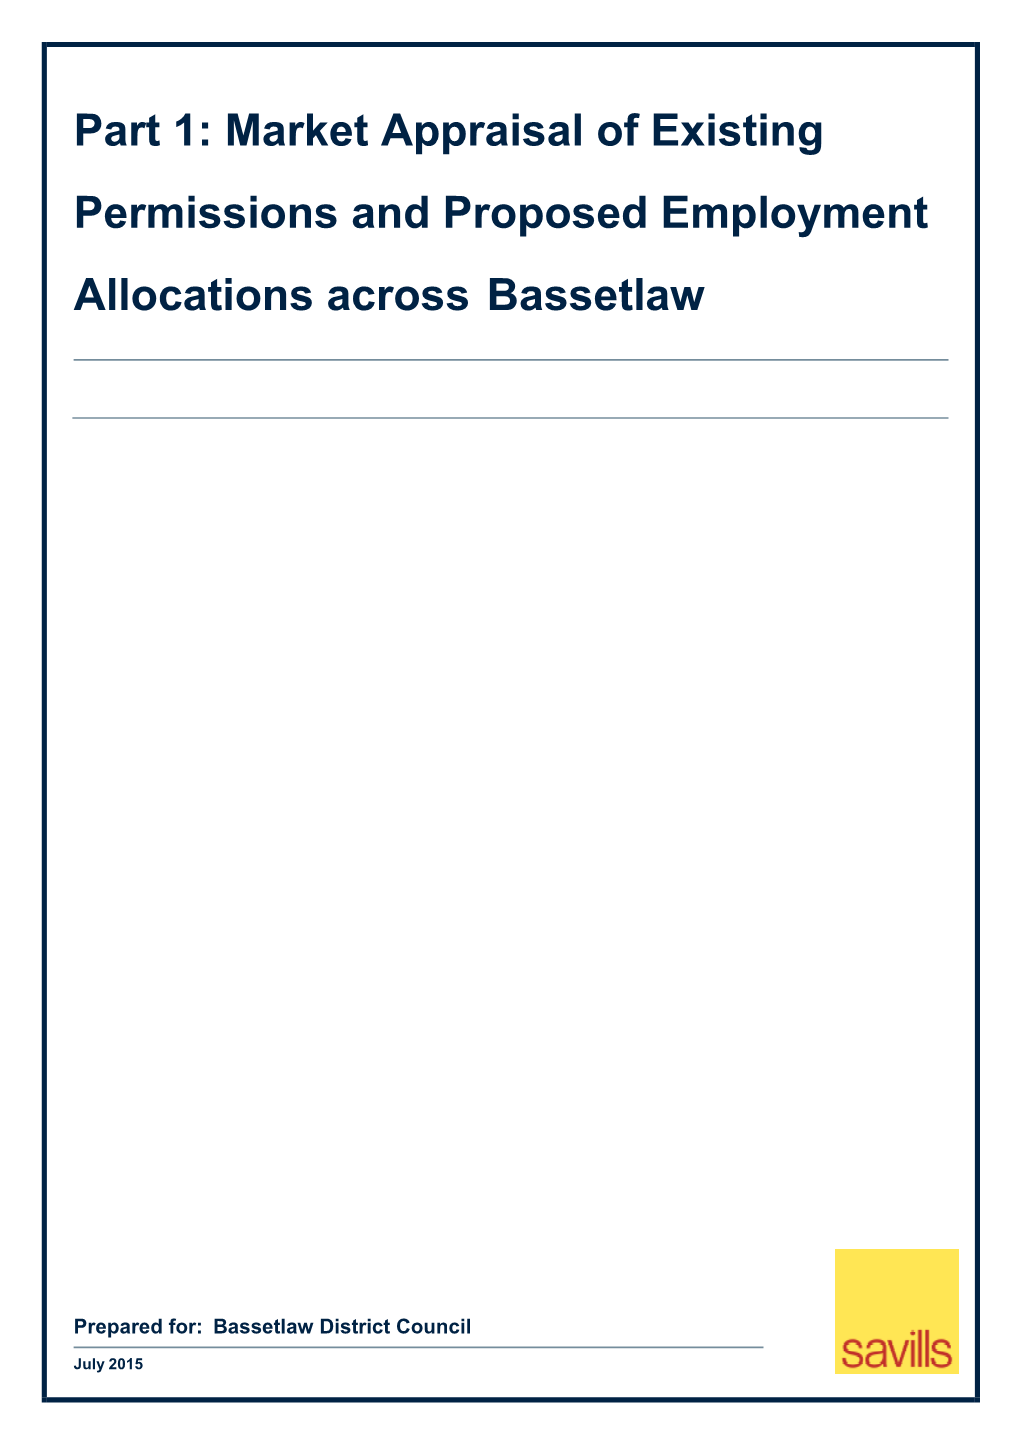 Part 1: Market Appraisal of Existing Permissions and Proposed Employment